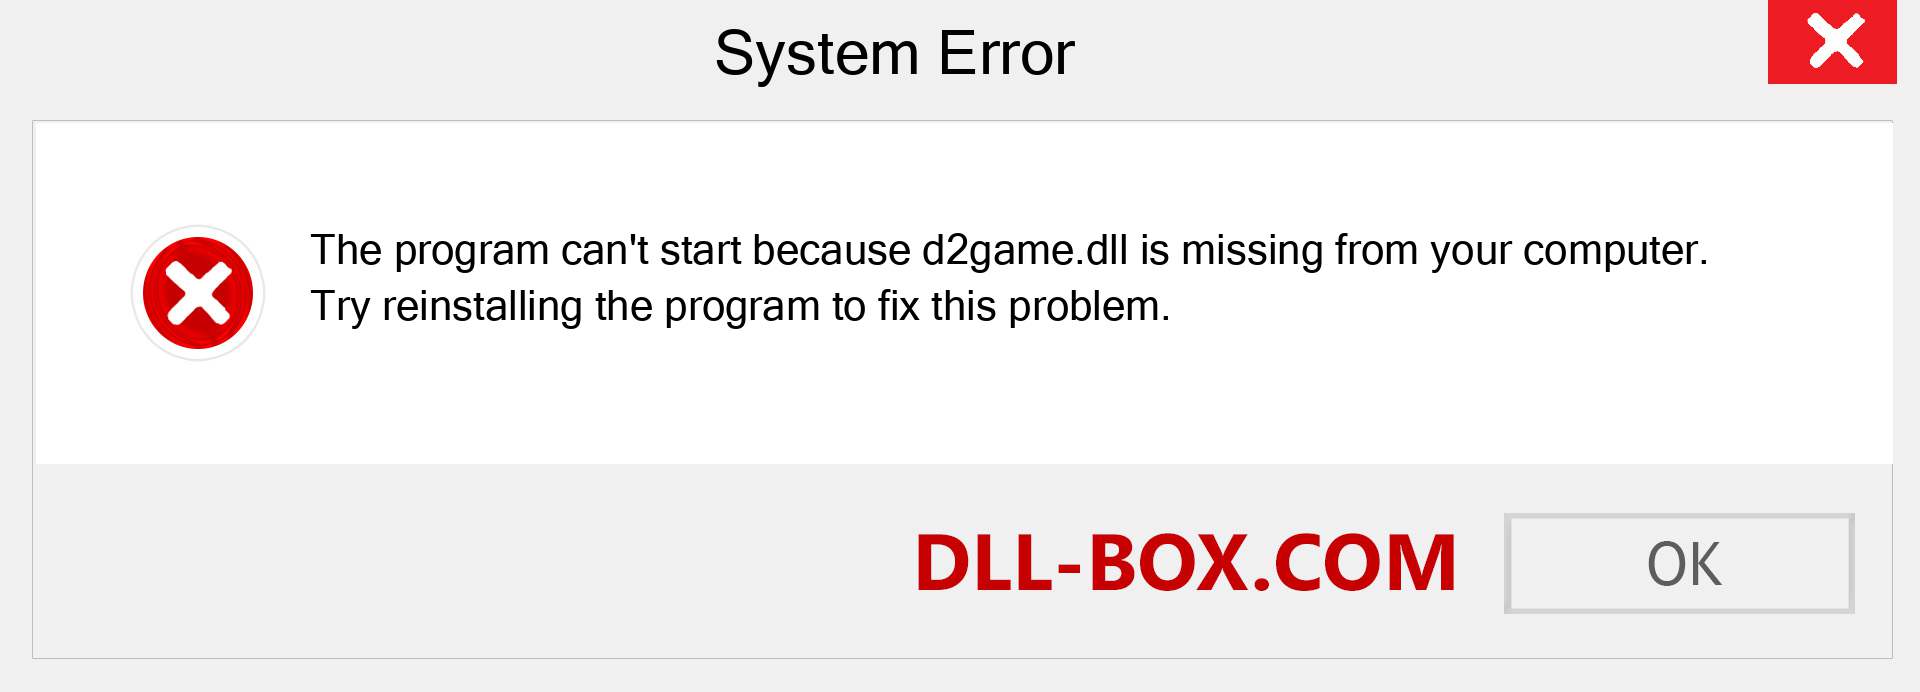  d2game.dll file is missing?. Download for Windows 7, 8, 10 - Fix  d2game dll Missing Error on Windows, photos, images